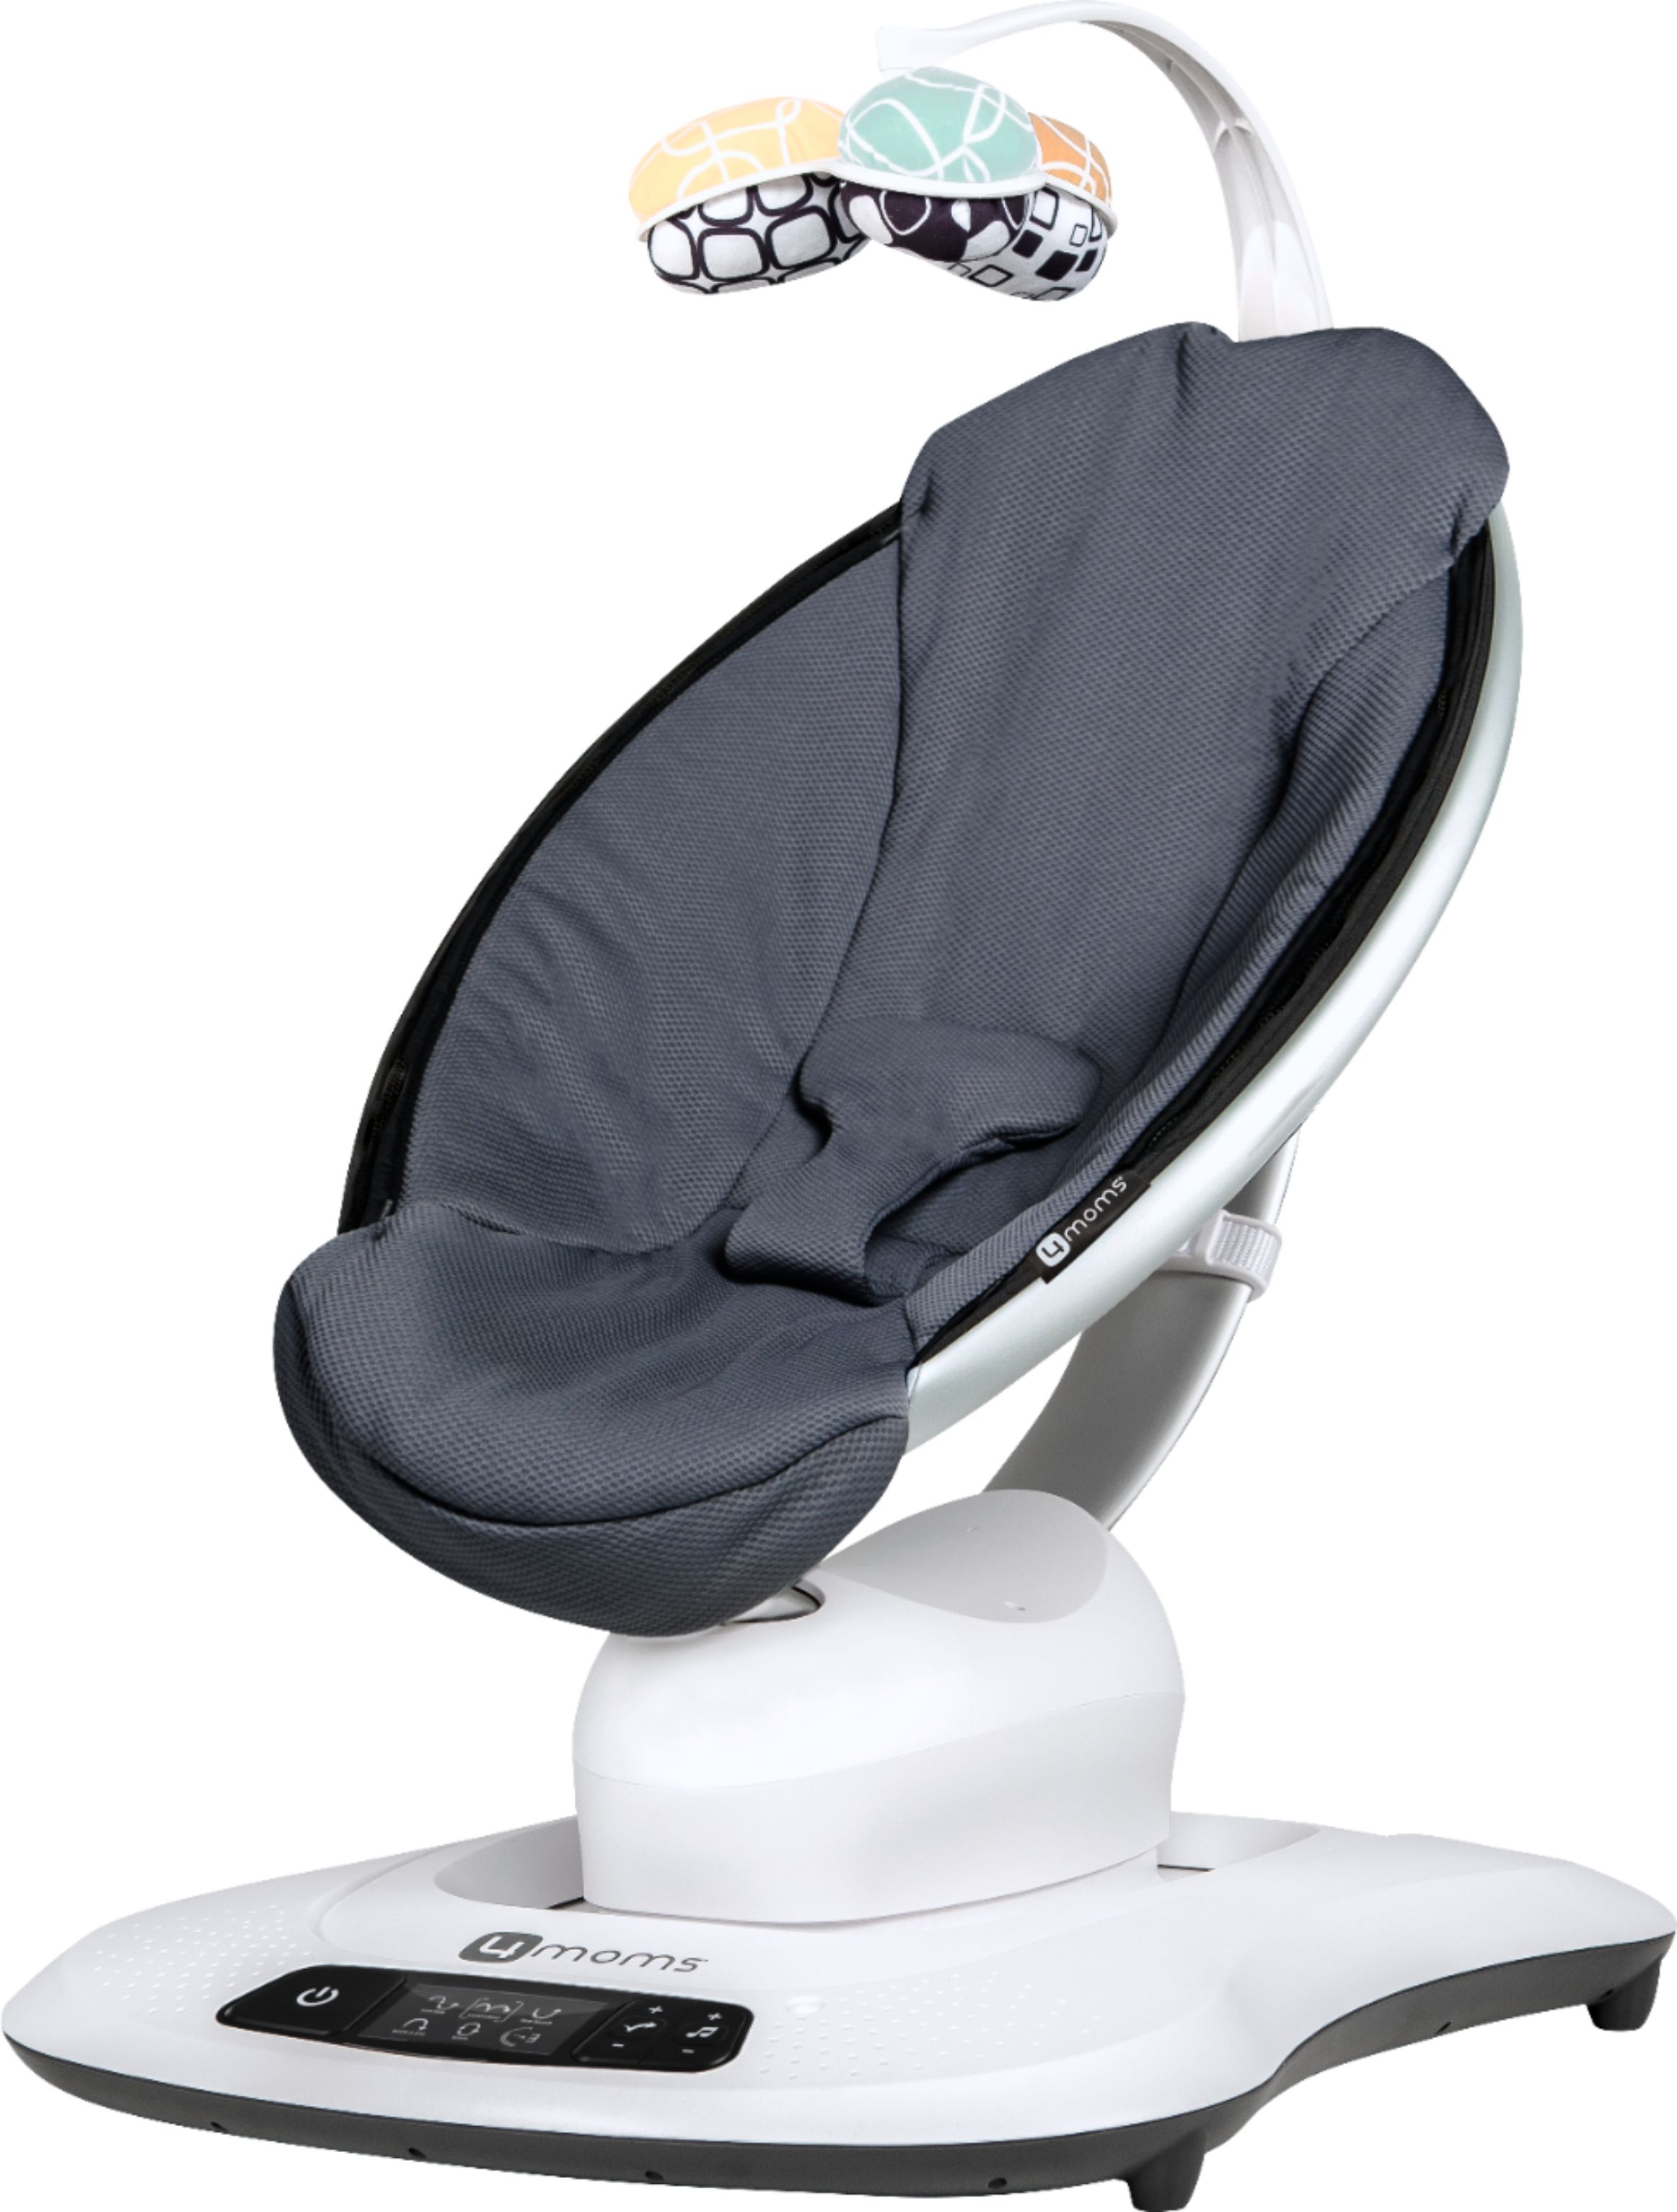 Angle View: Graco Sense2Soothe Baby Swing with Cry Detection Technology, Grey, Infant